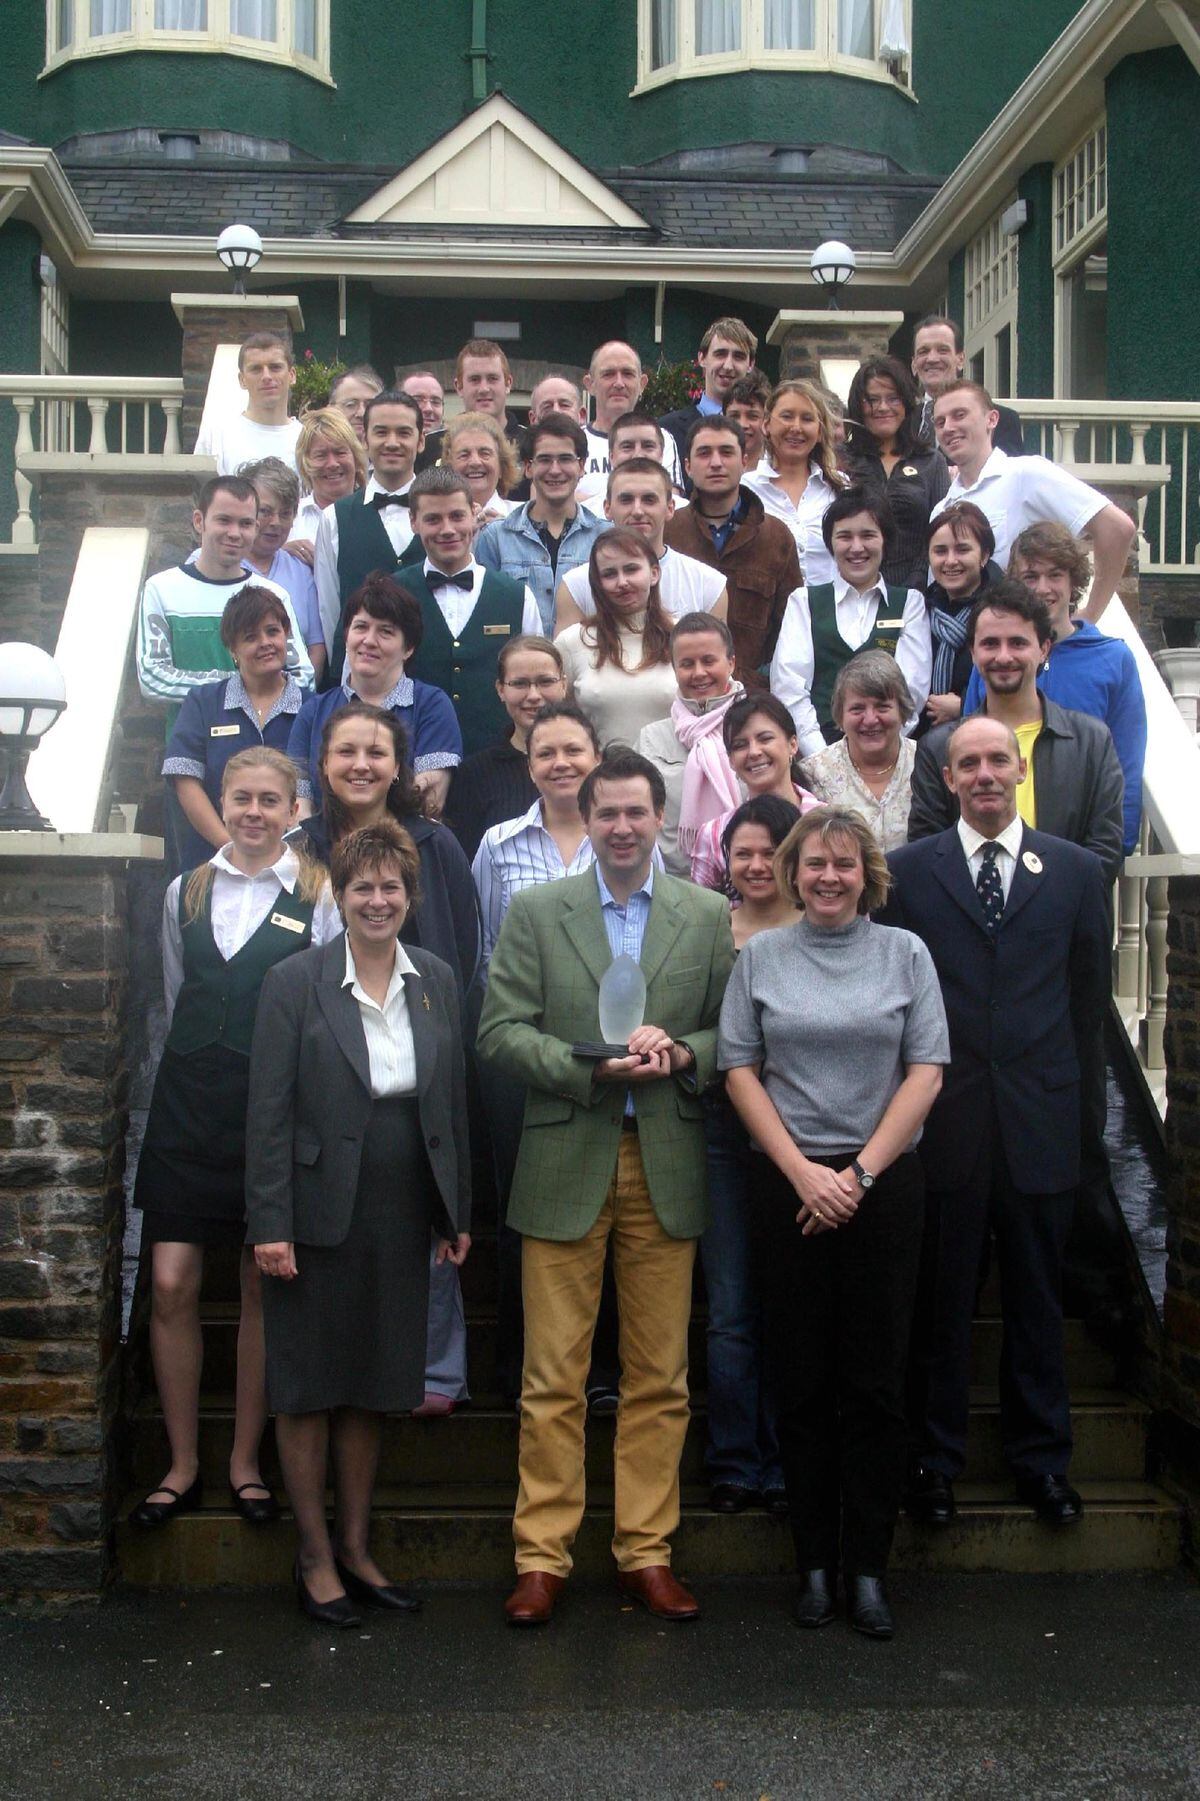 Justin Baird-Murray, managing director of The Metropole Hotel, Llandrindod Wells, celebrates the Business Tourism Award with members of staff in 2005